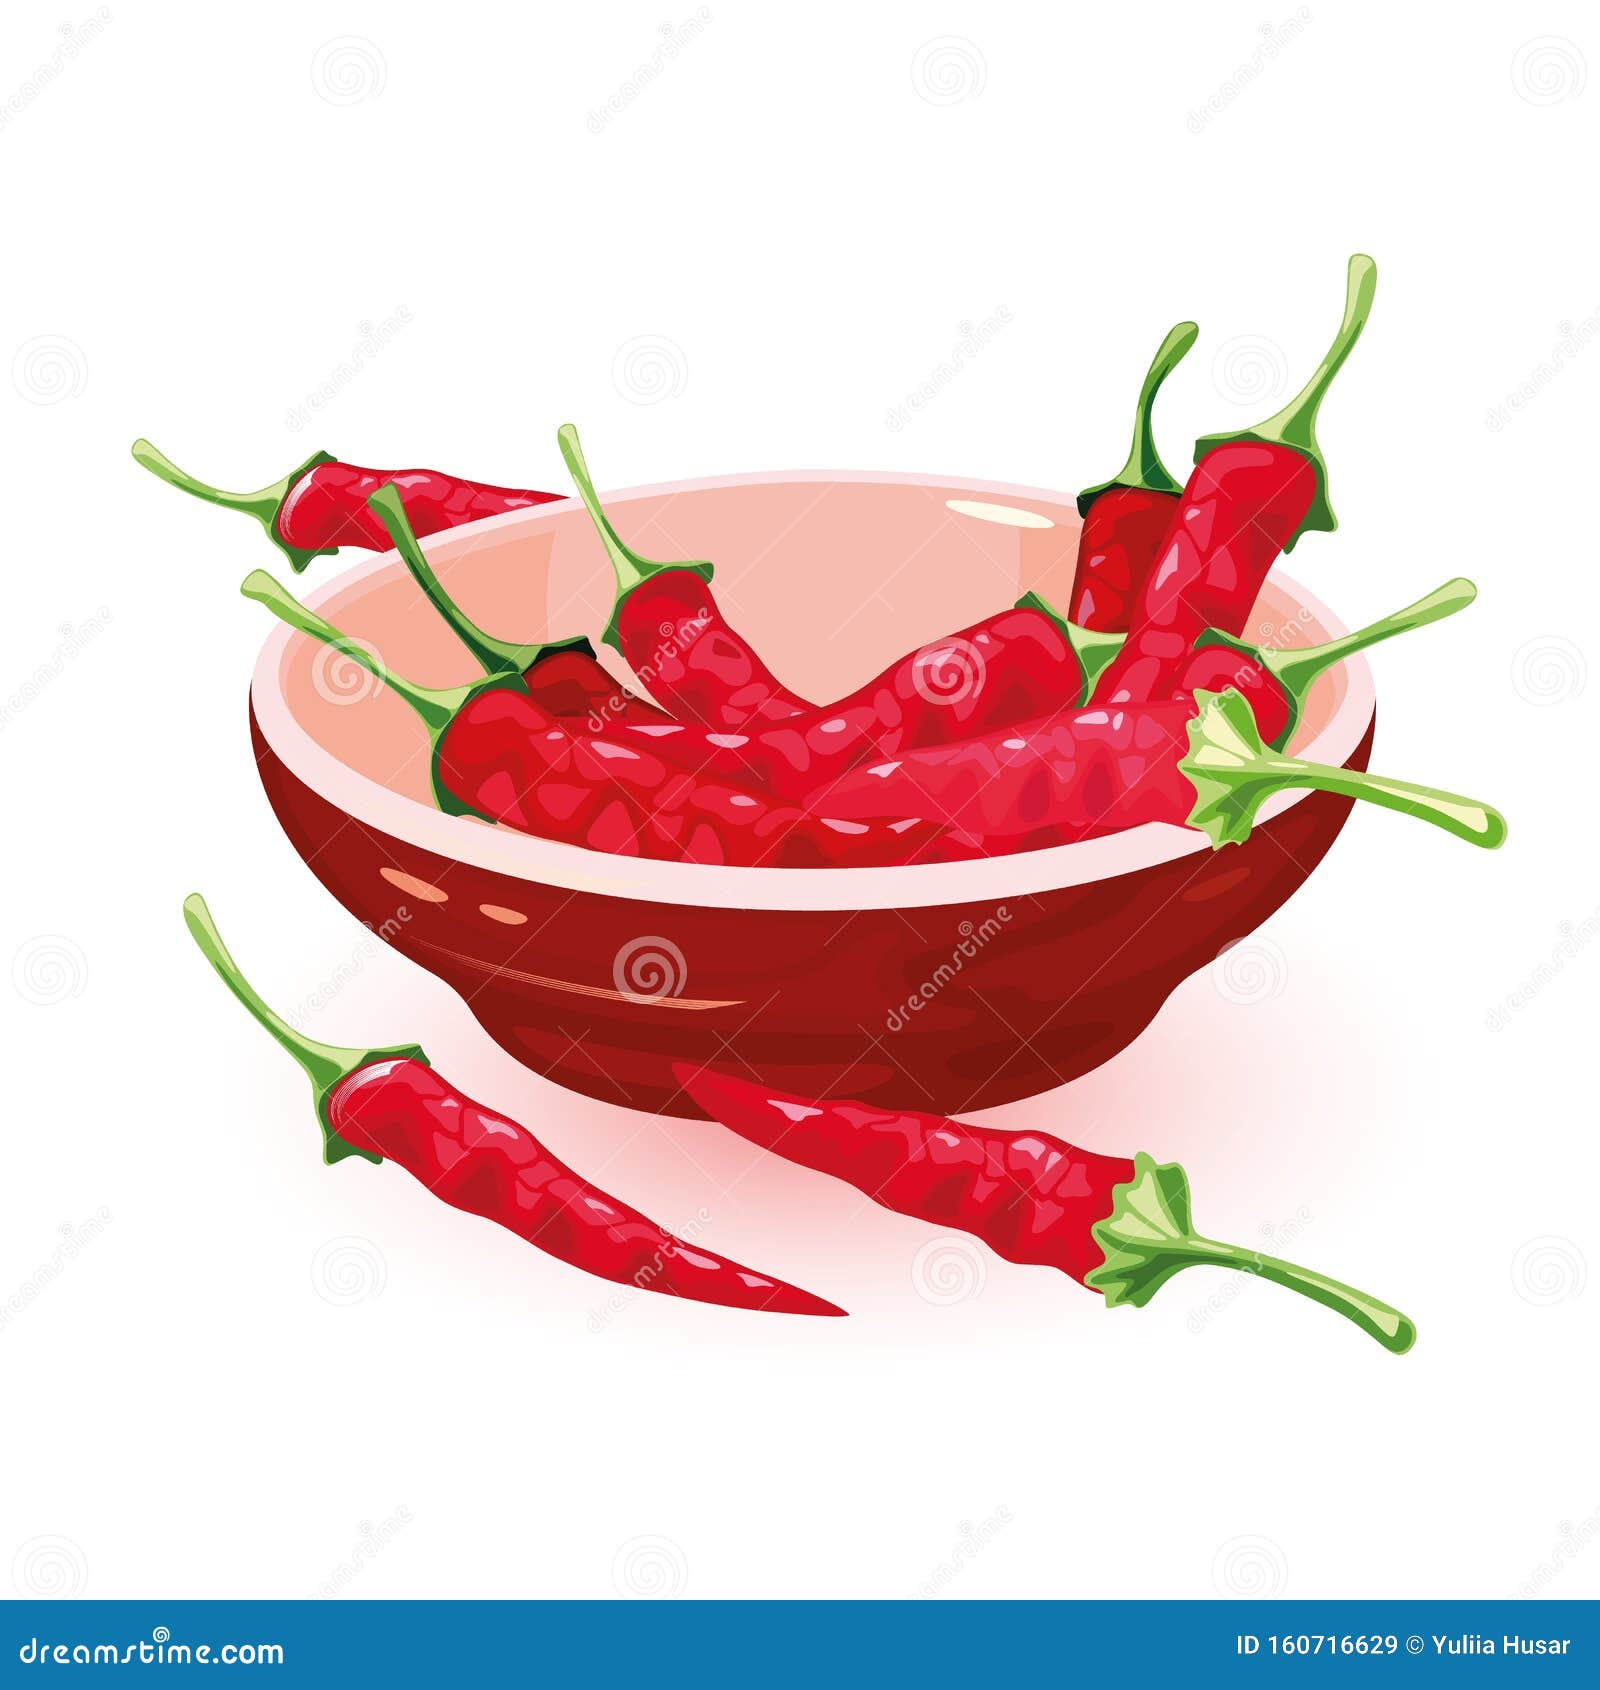 dried red chili peppers with sharp taste are in ceramic bowl. spice with pungent flavor.